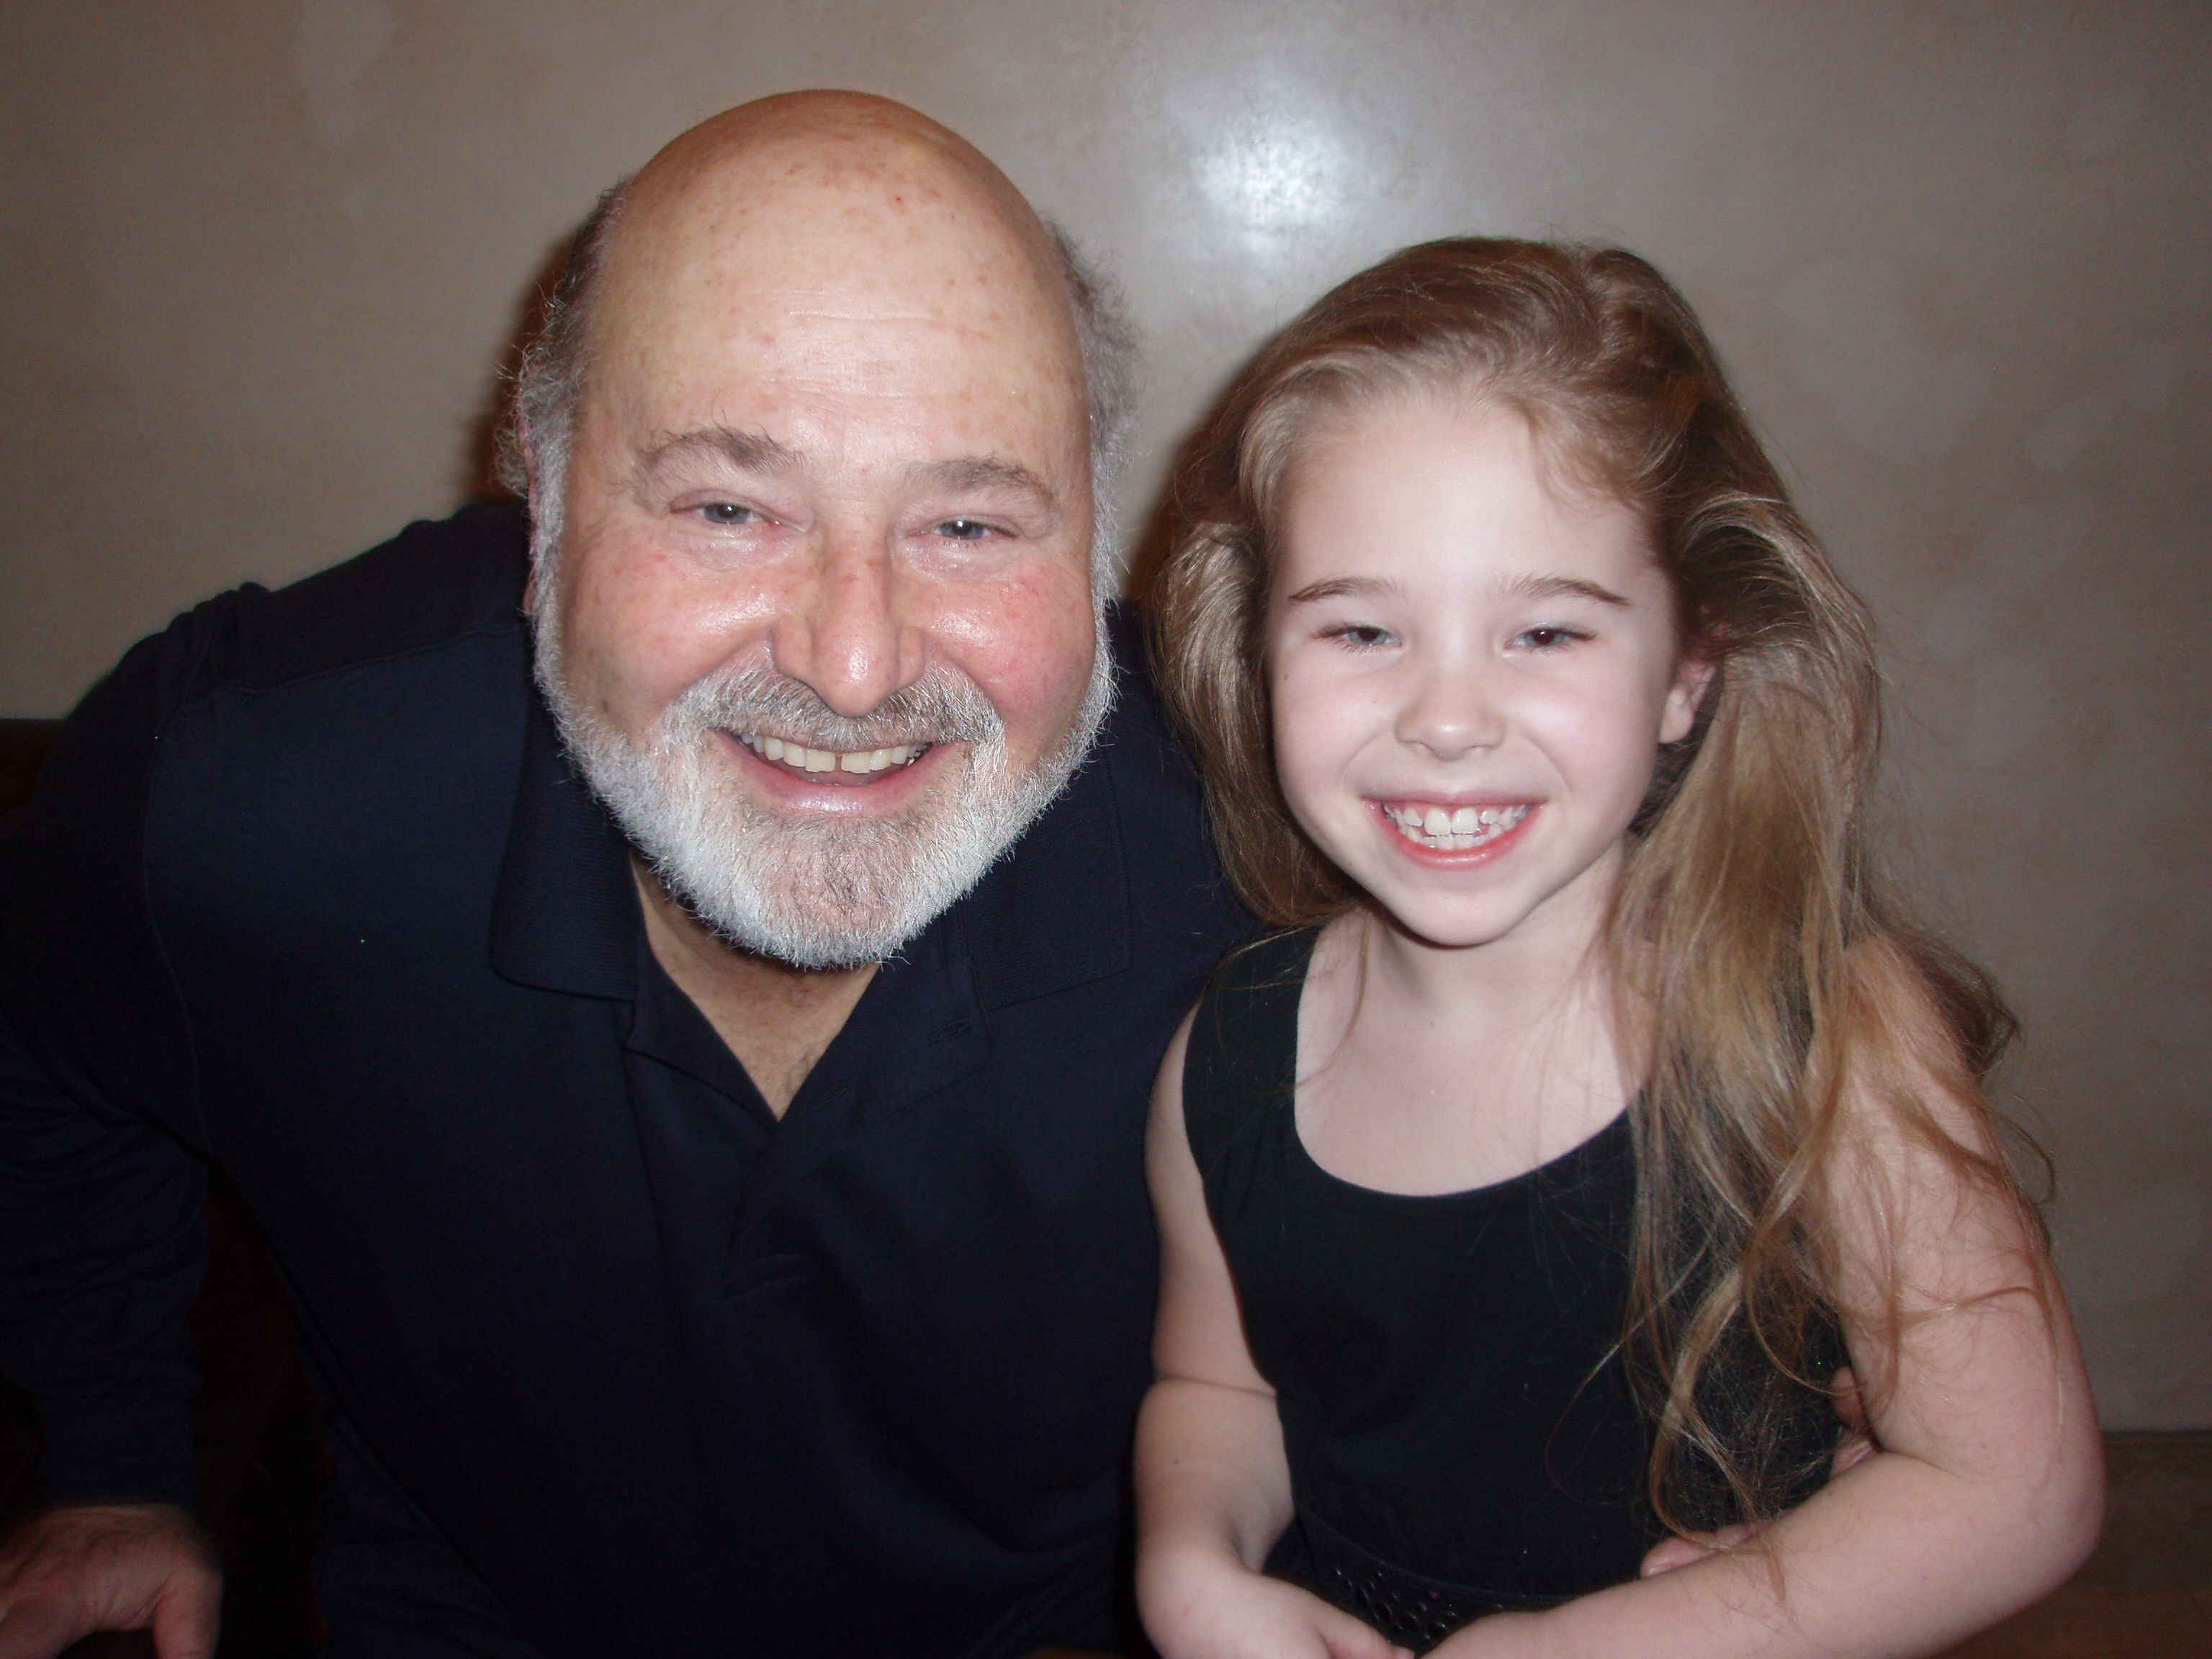 Taylor with Mr. Rob Reiner at the screening of 